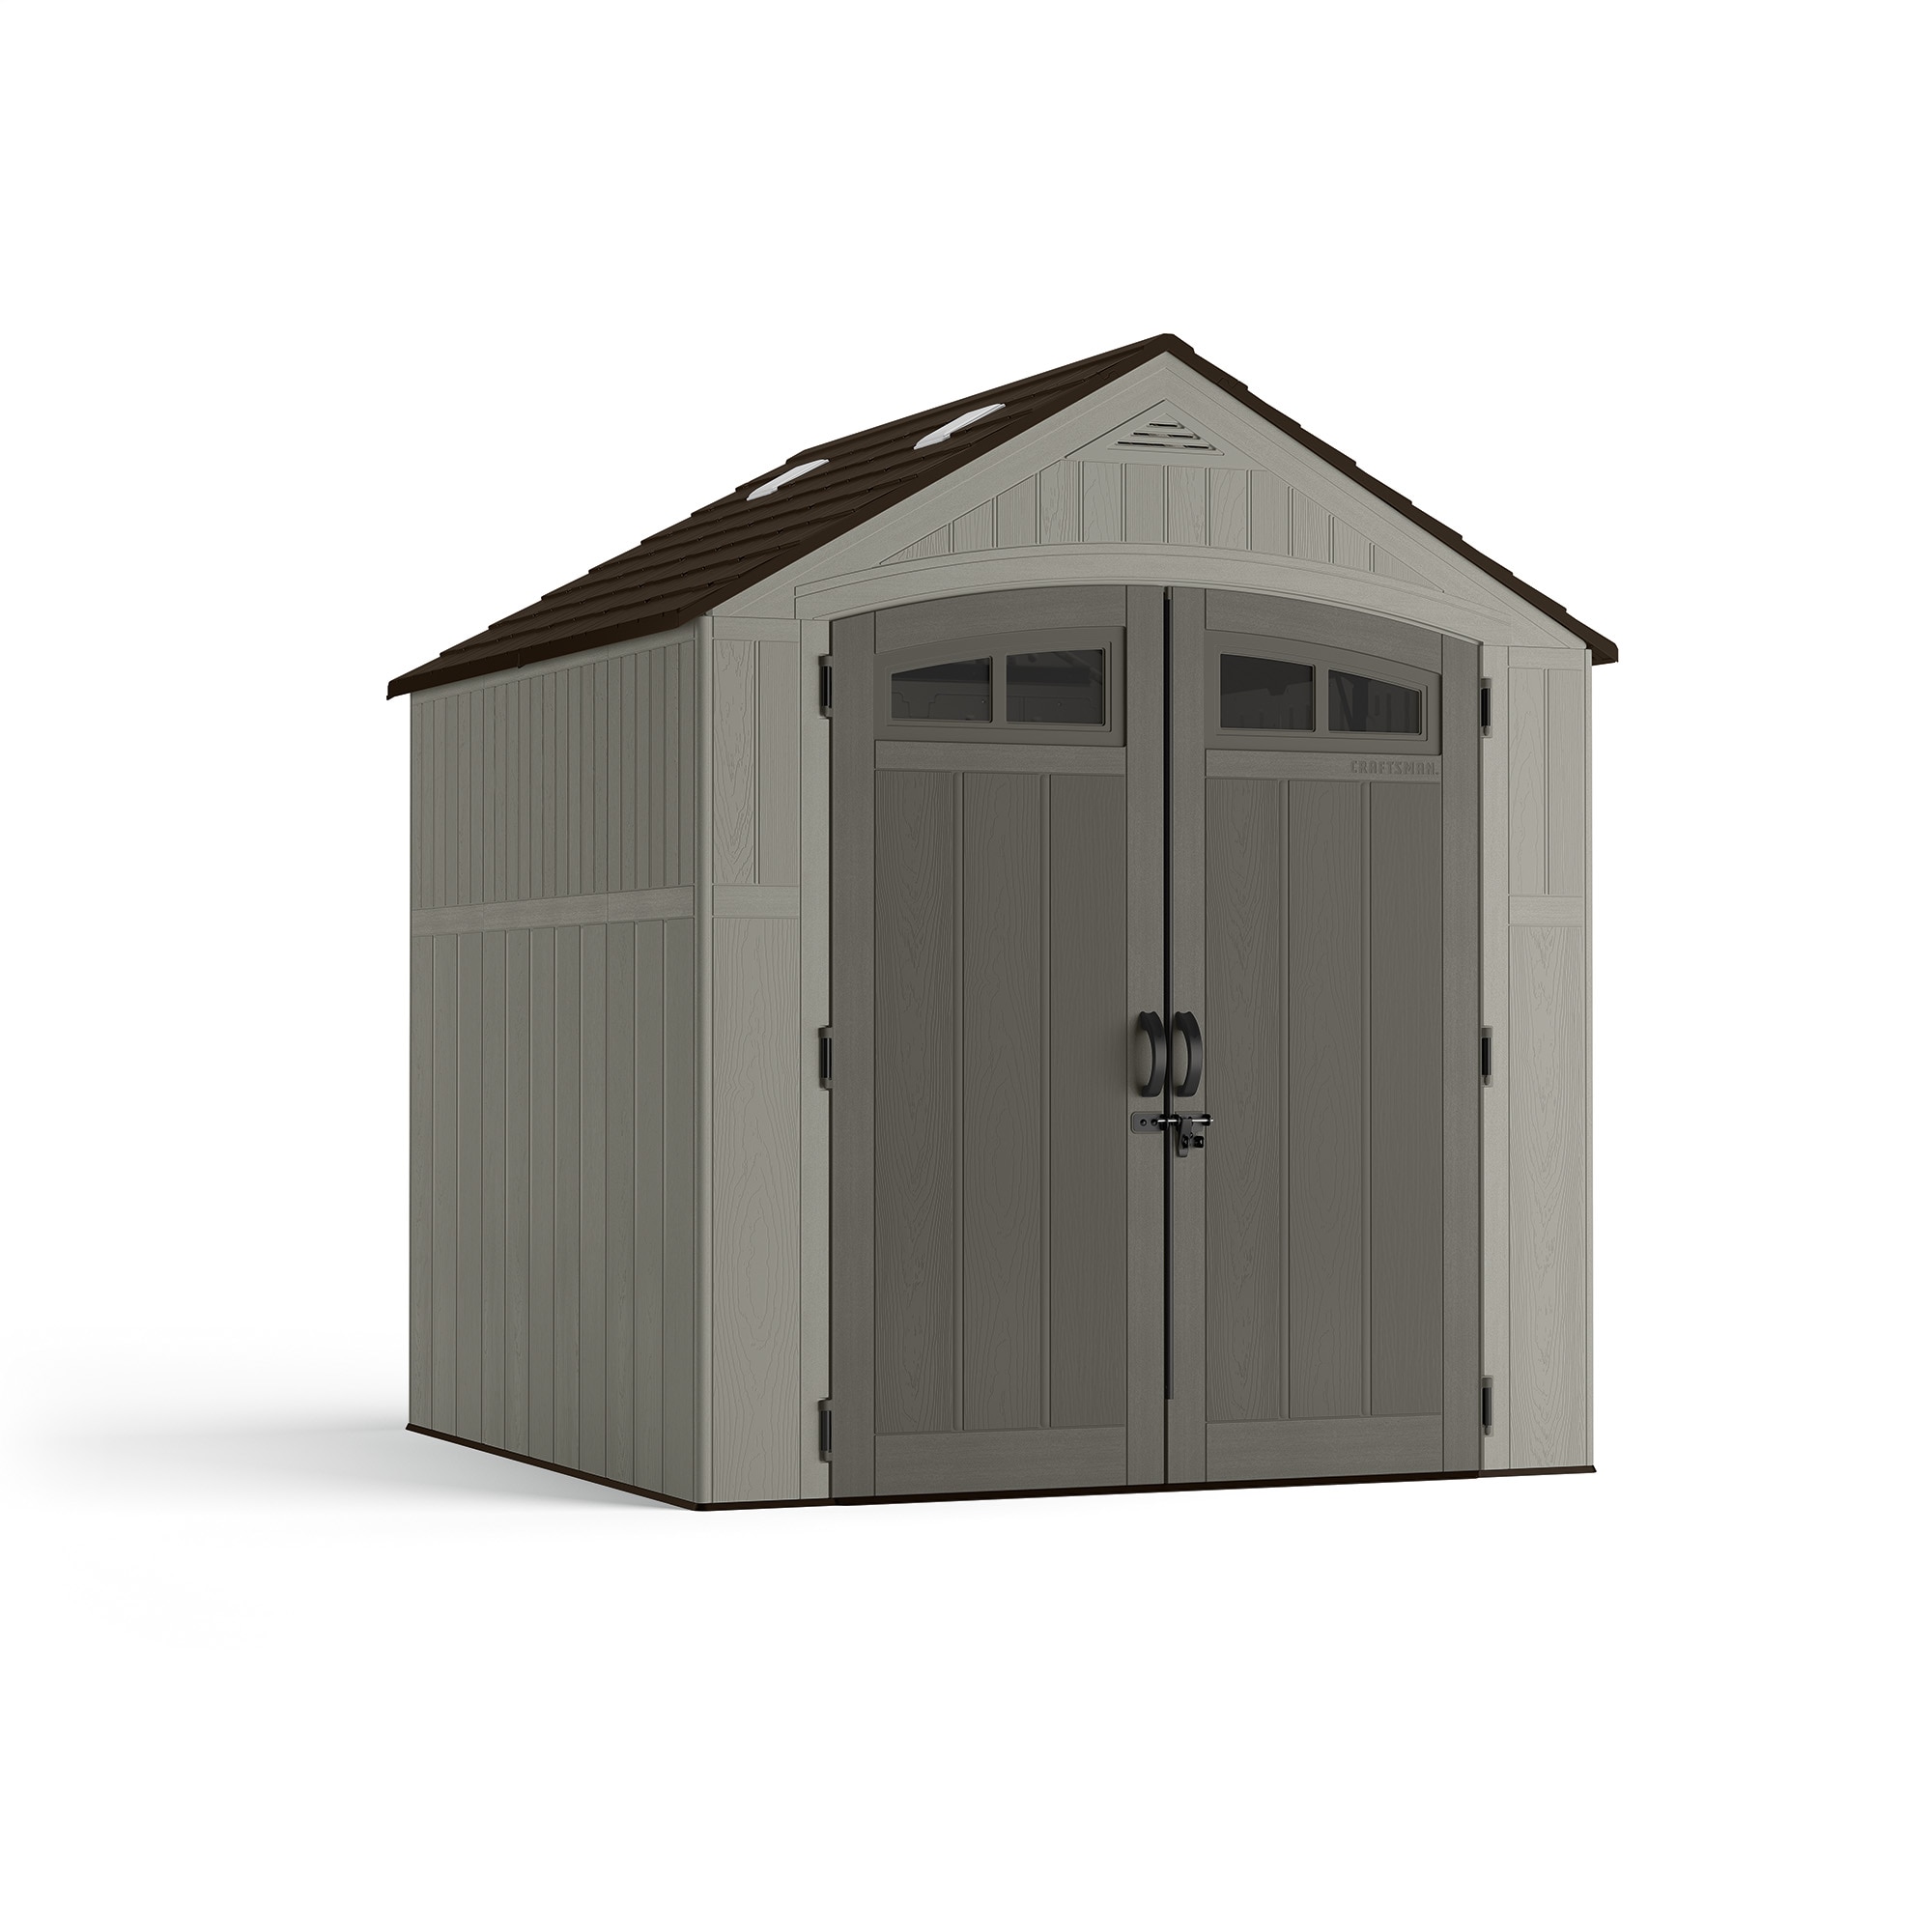 Keter Keter Store it out Premier Max XL Outdoor Garden Storage Shed Grey 